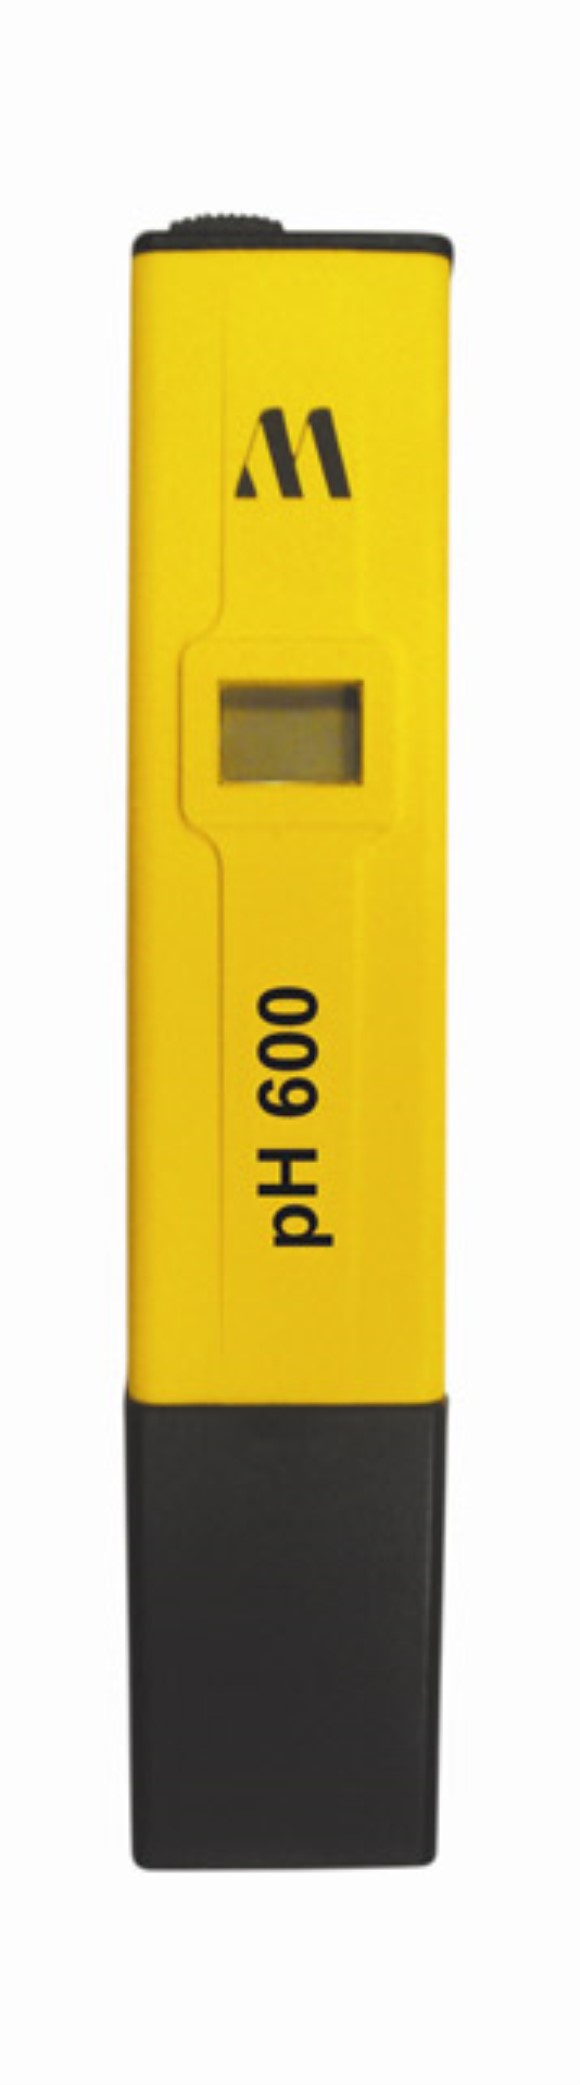 Milwaukee Instruments pH 600 pH Tester With 1 Point Manual Calibration